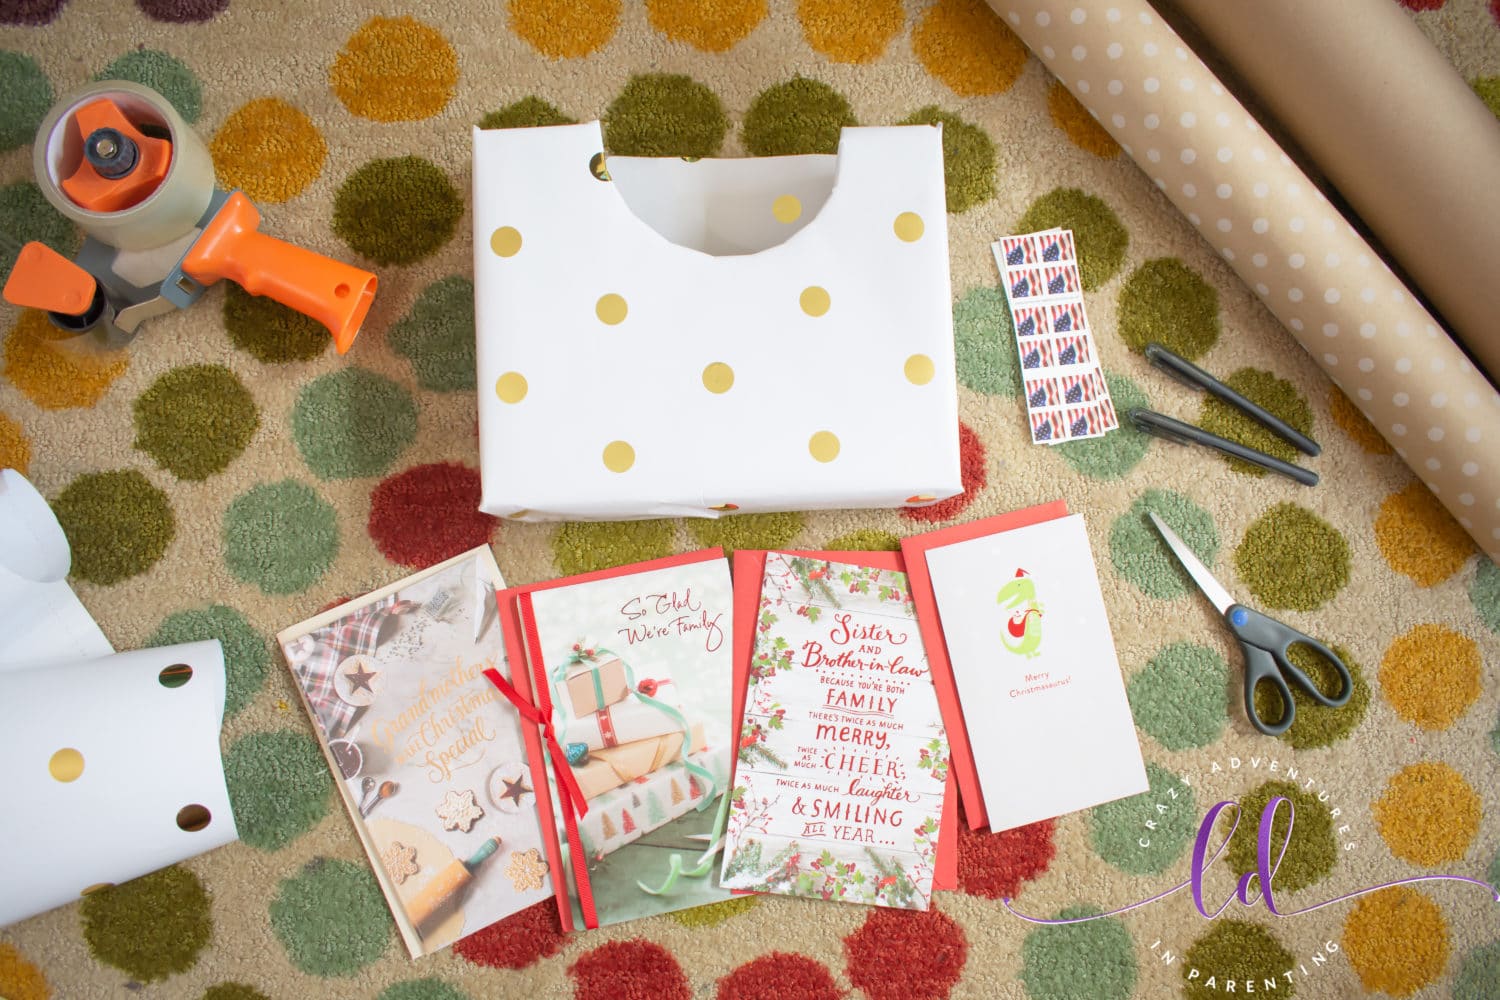 American Greetings Cards Ready for DIY Greeting Card Storage Box